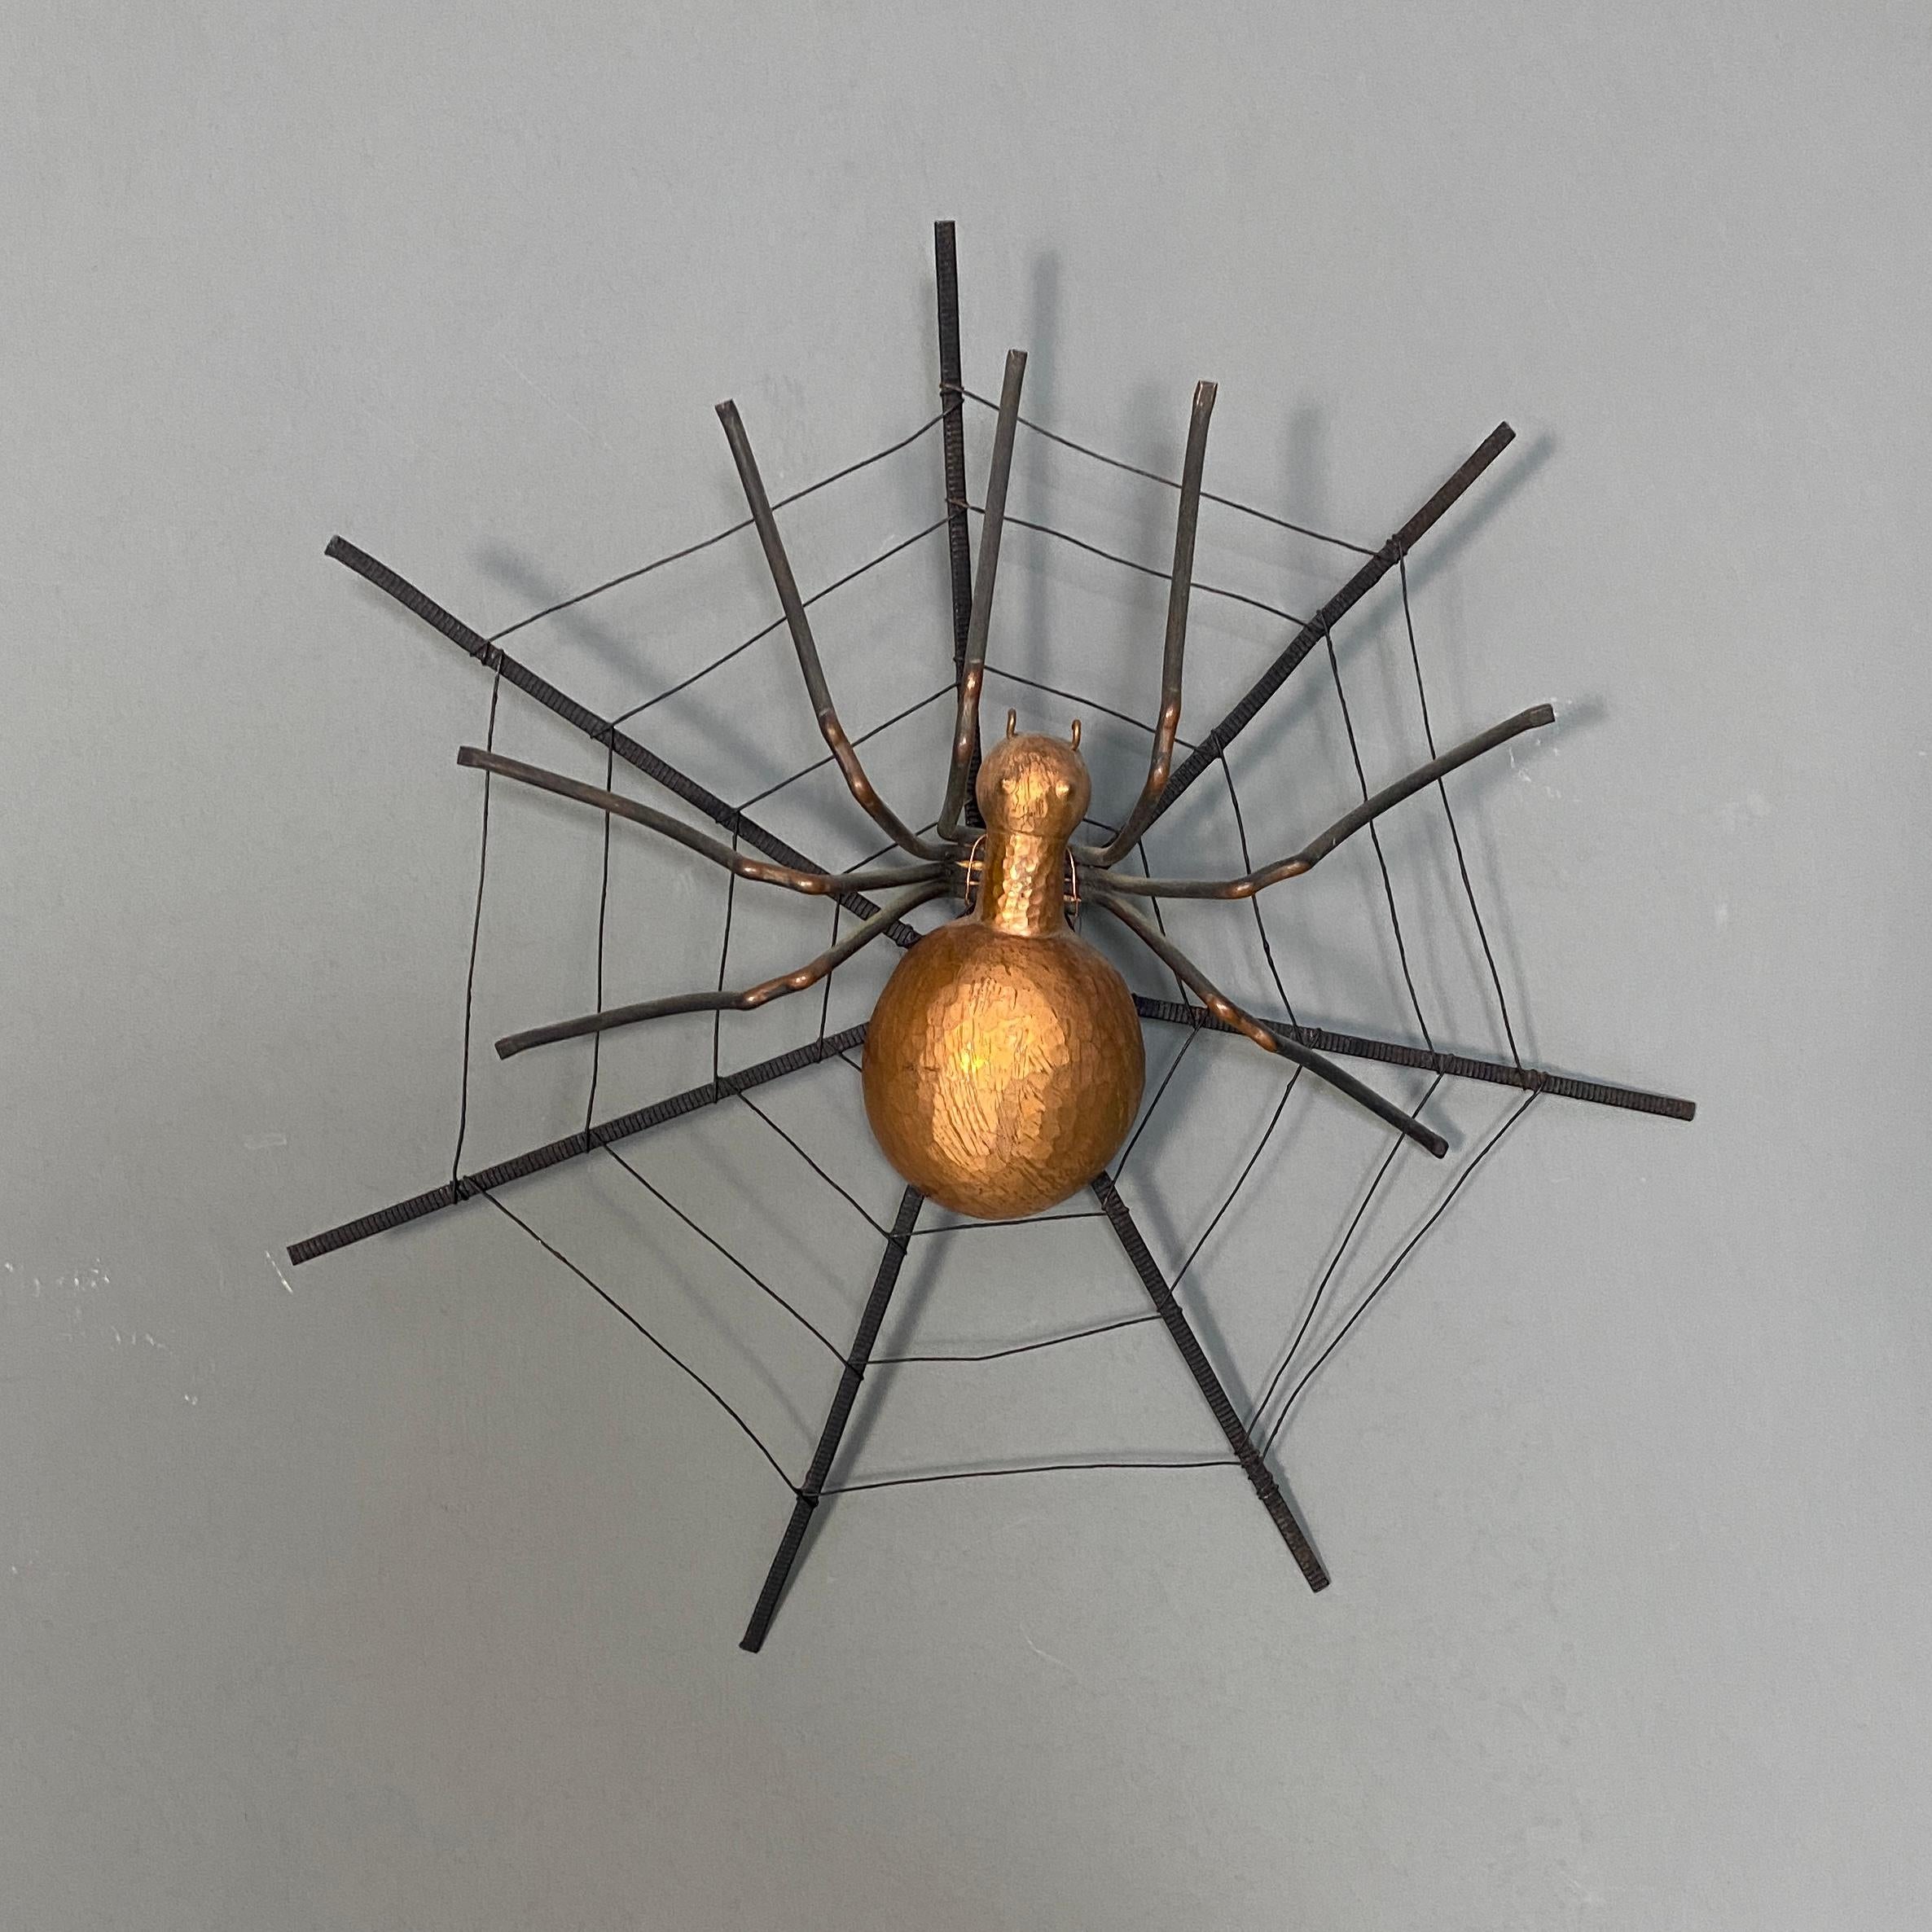 Spider-shaped wall decoration, 1960s
Spider-shaped wall decoration with metal legs and head, the body is in copper. The spider It can be used as a wall or table decoration.
1960s

Good conditions

The Measurements in cm 8x30x30h.

If you are